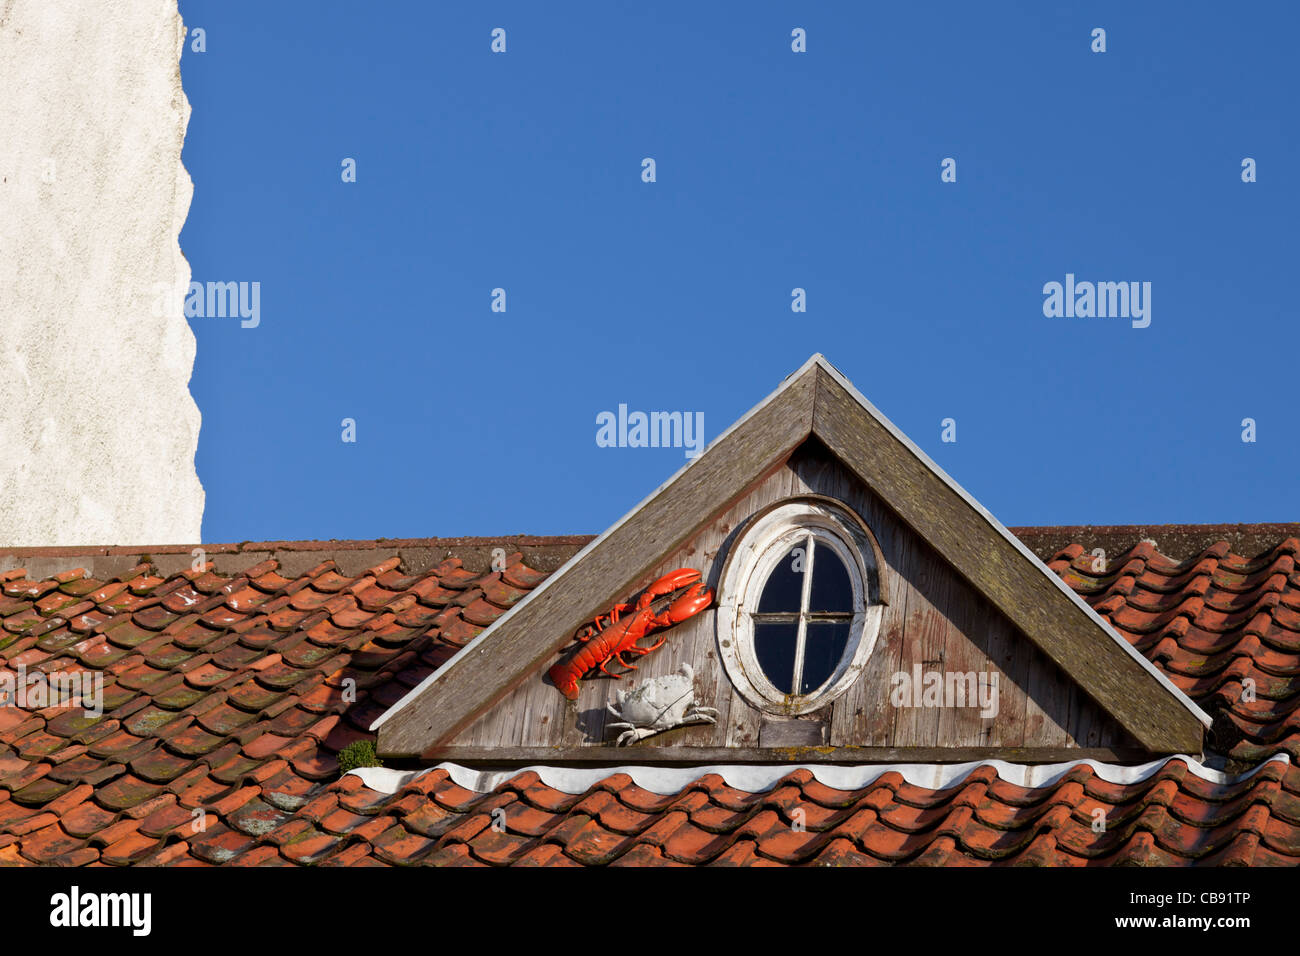 Lobster and crab on roof dormer window, Crail, East Neuk of Fife, Scotland Stock Photo